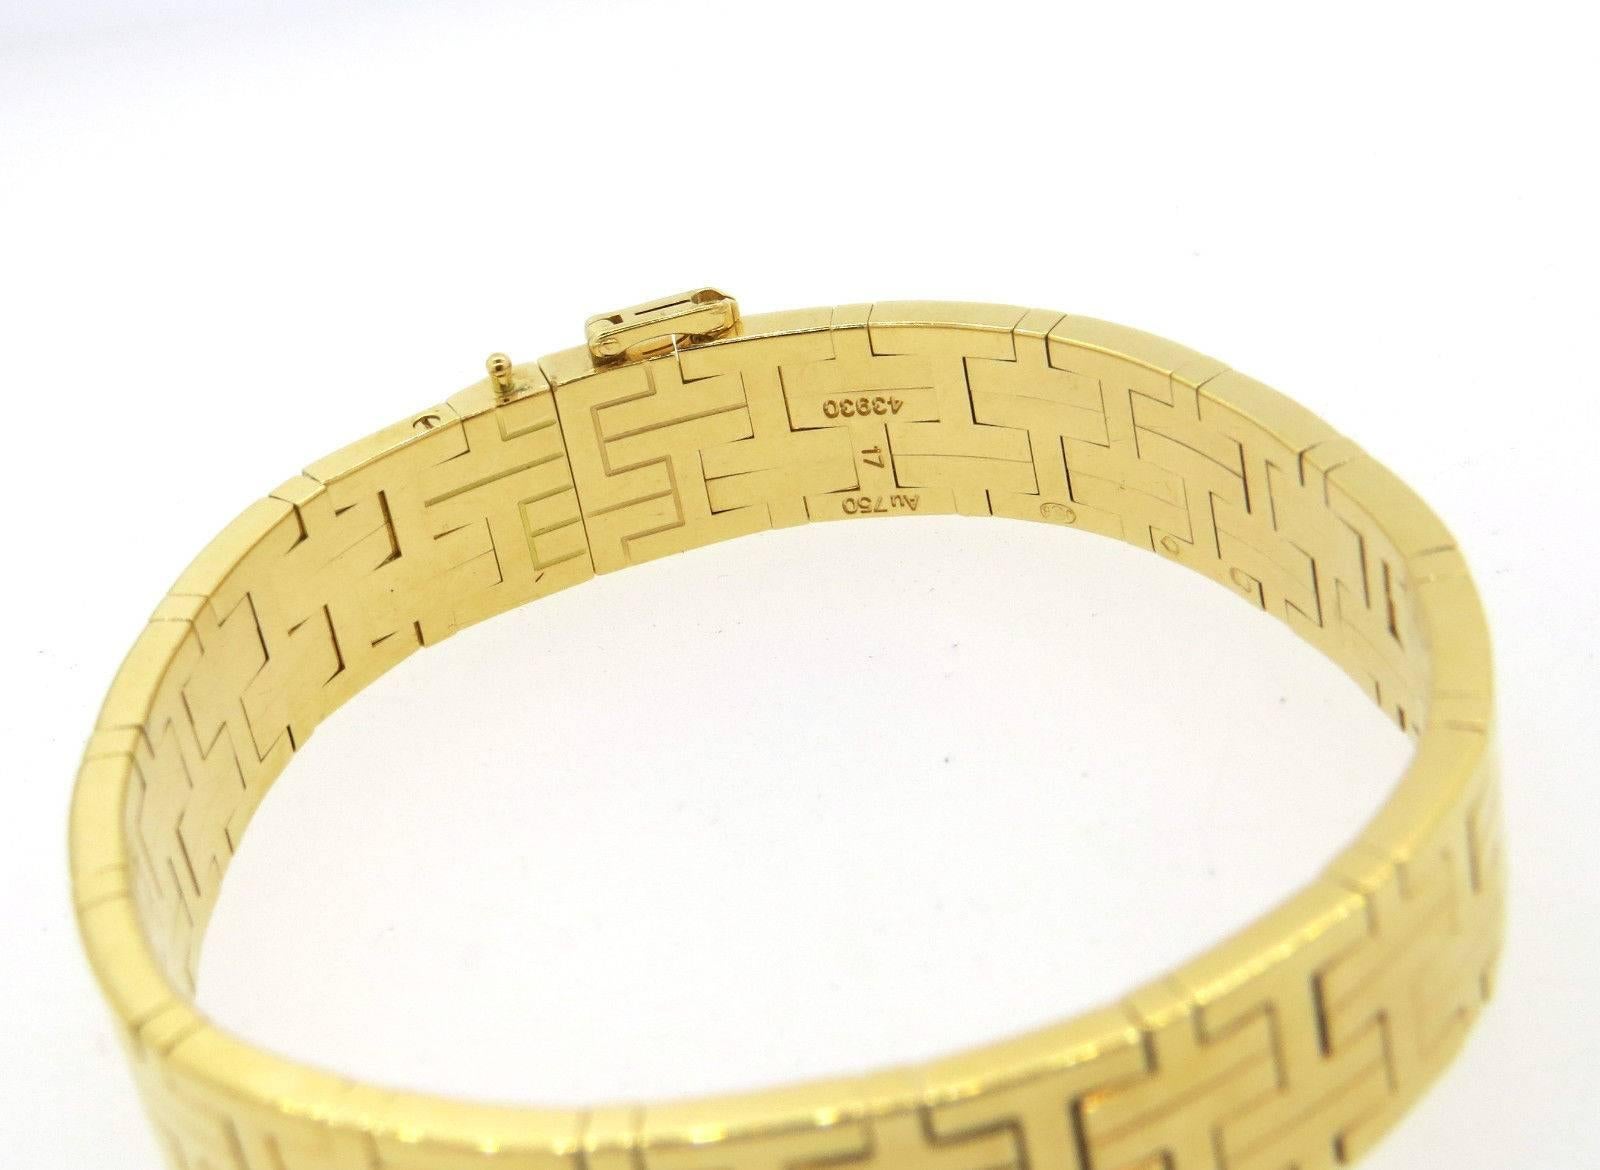 An 18k yellow gold bracelet set in the classic H pattern by Hermes.  The bracelet is 6 5/8